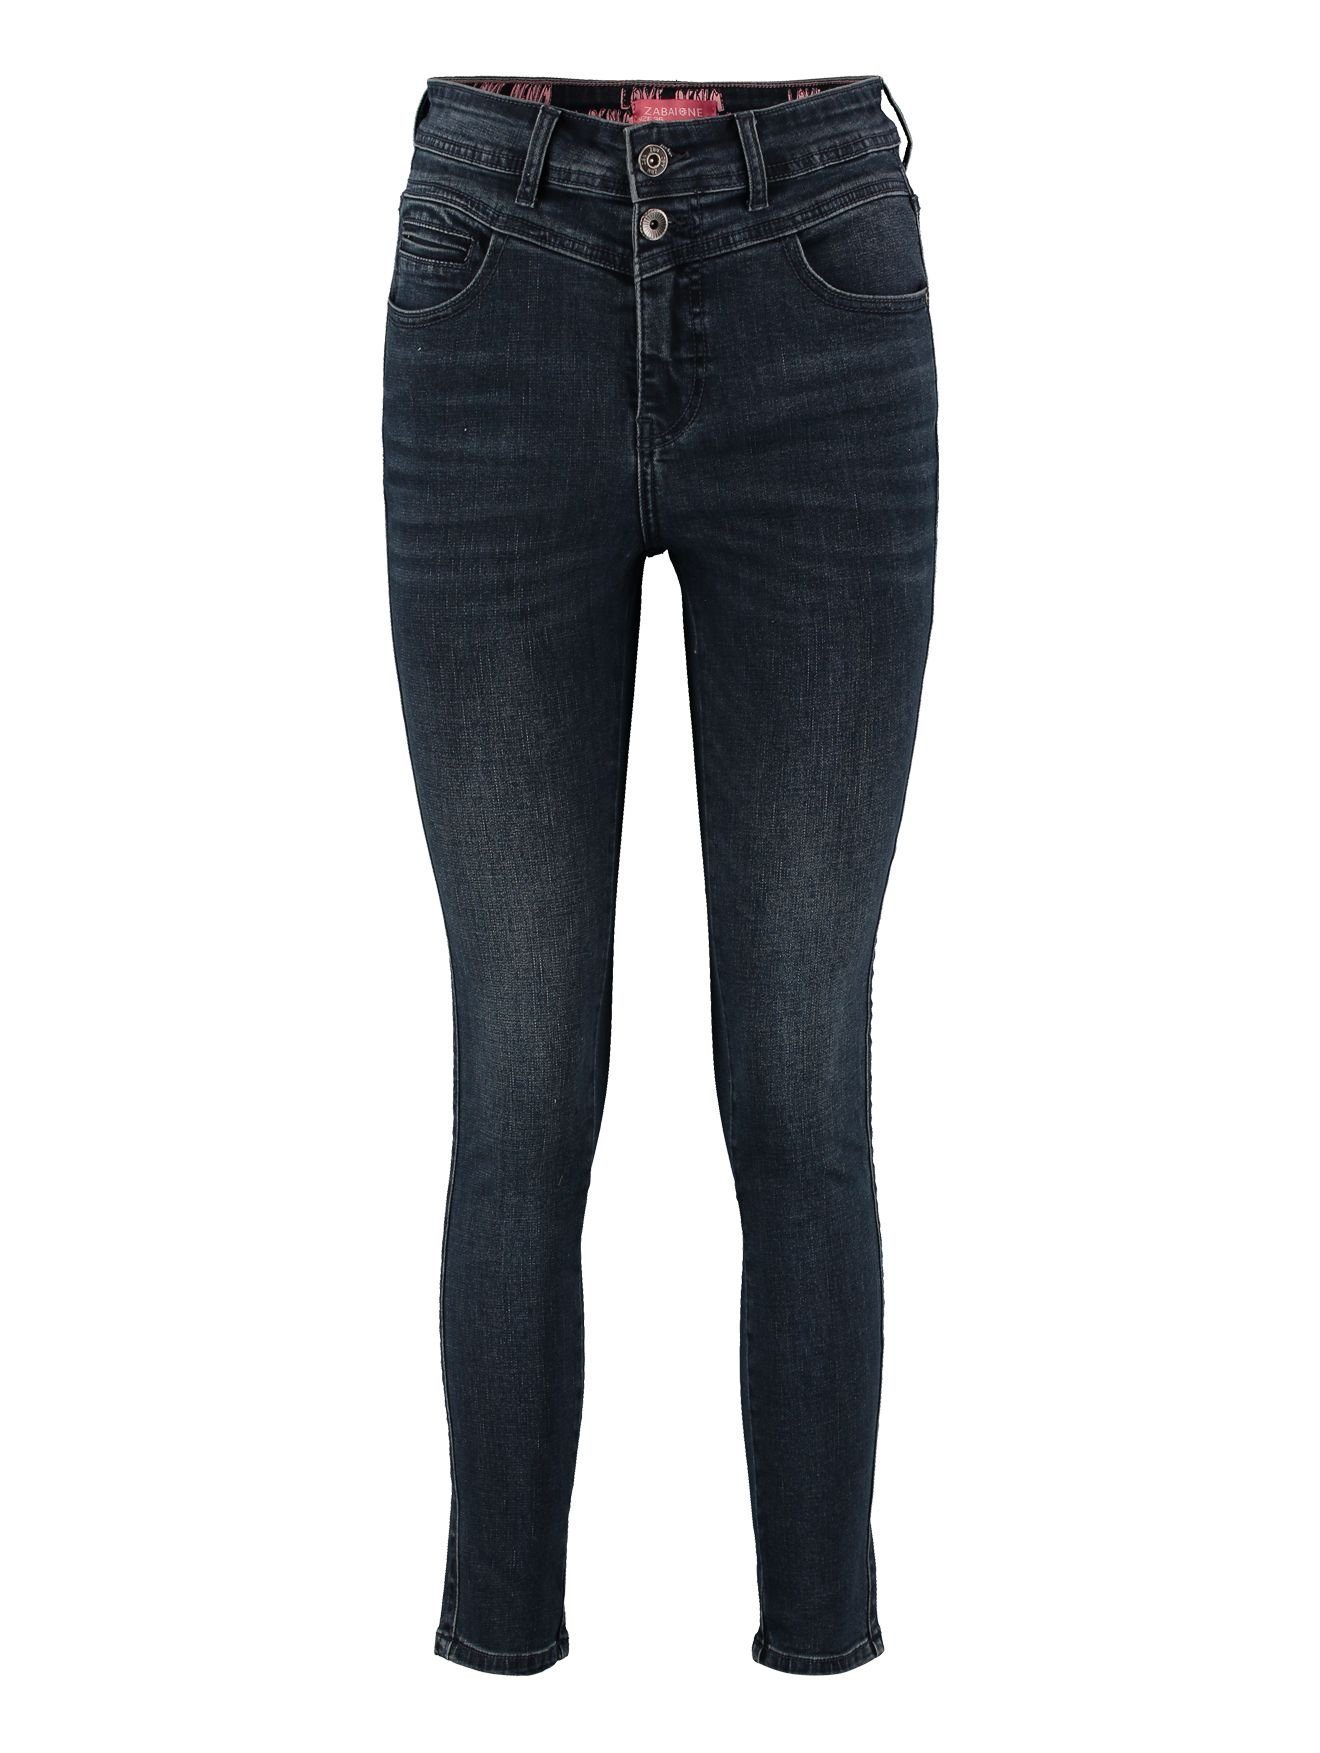 HaILY’S Skinny-fit-Jeans Jeans Ay44sha